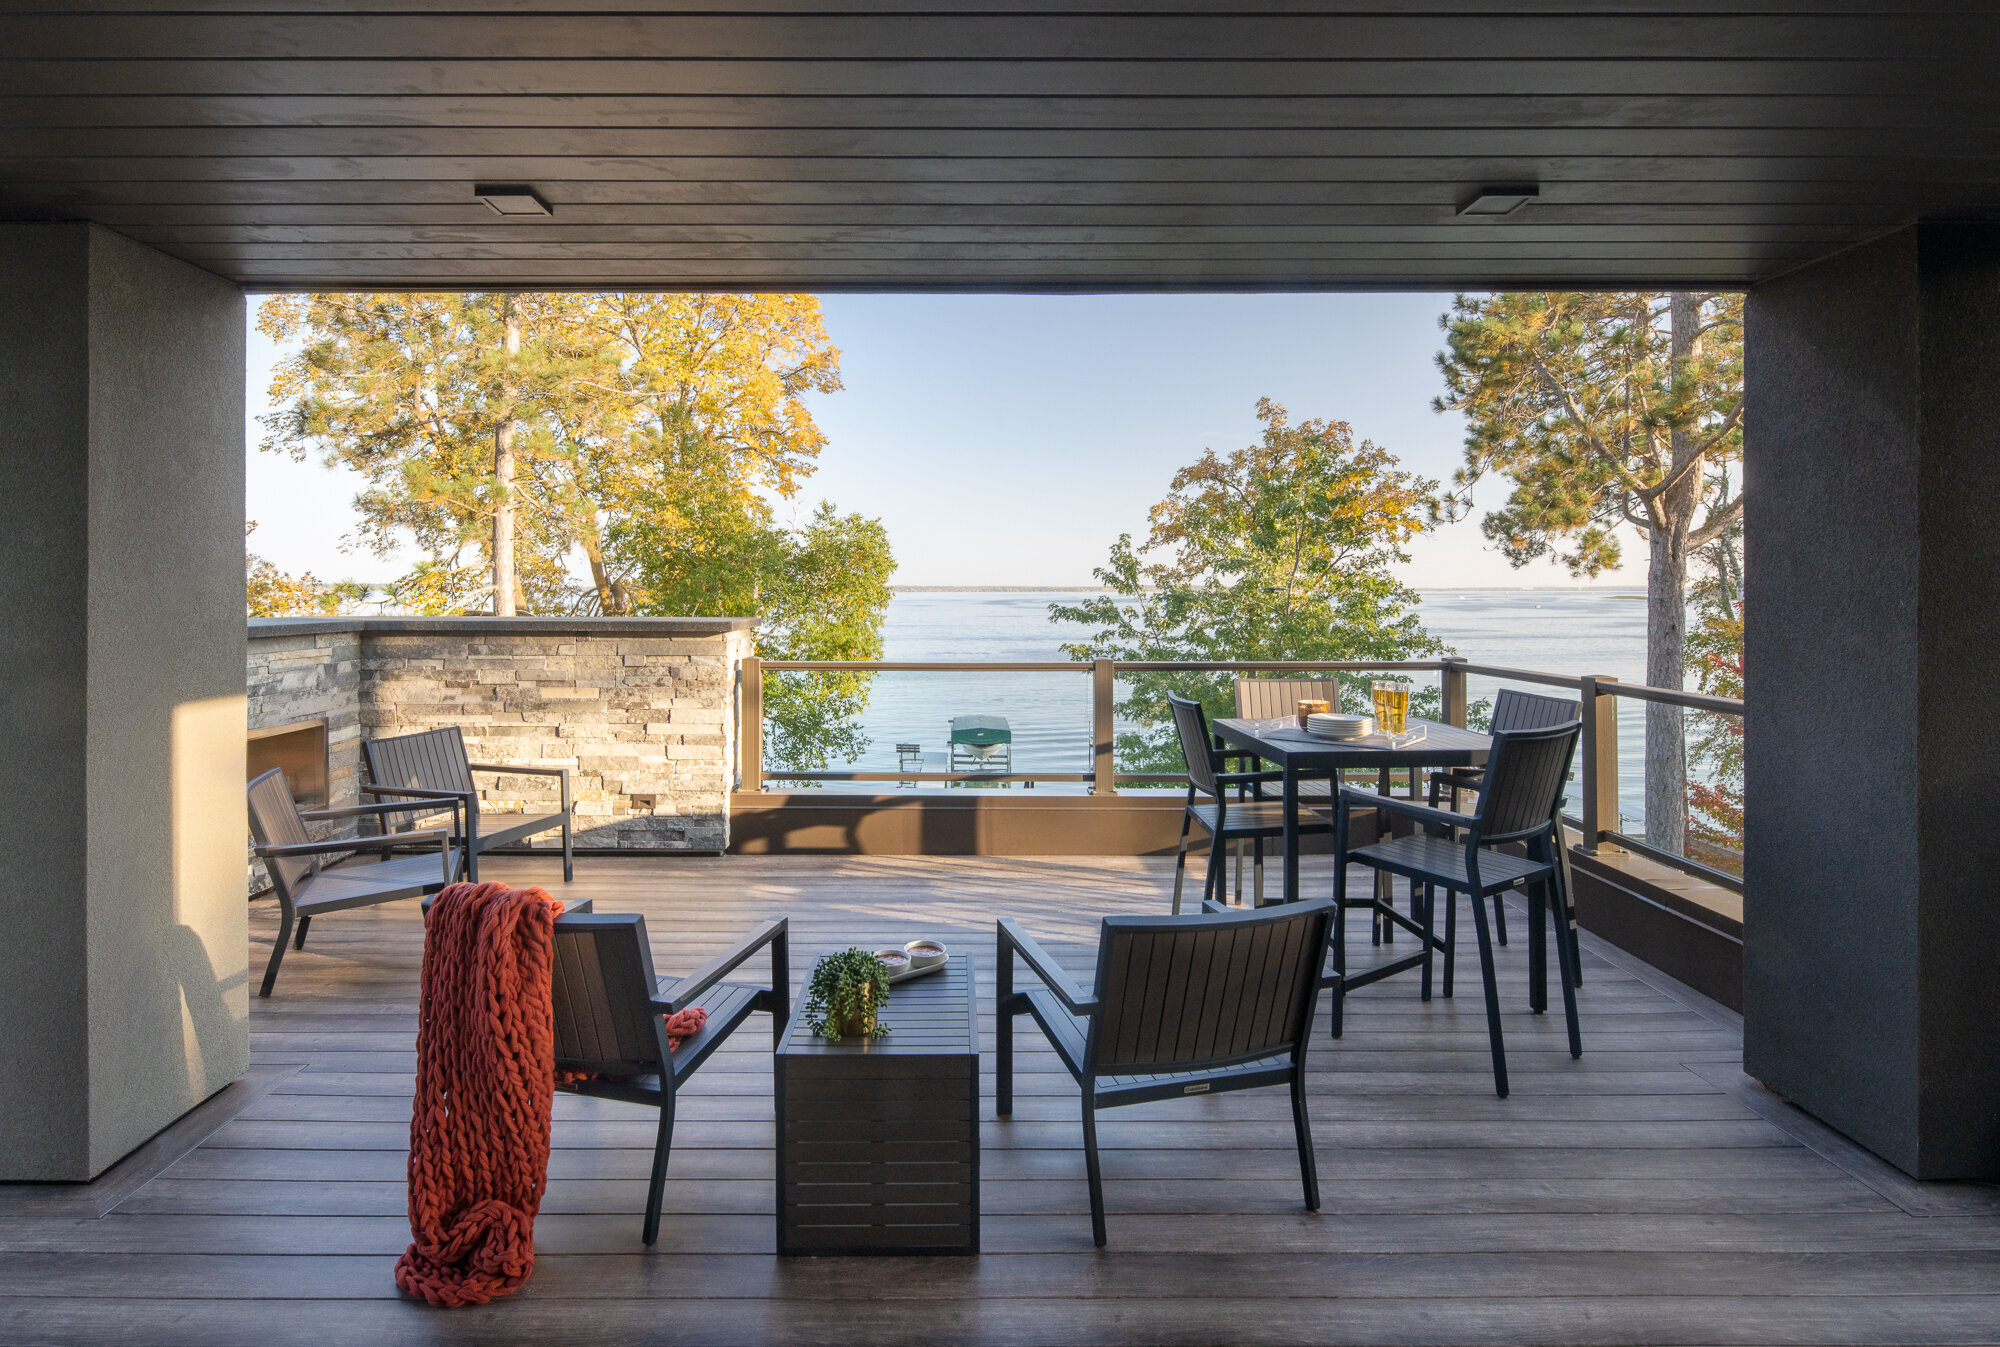 Architectural photo of a balcony of a modern lake home in Northern Minnesota